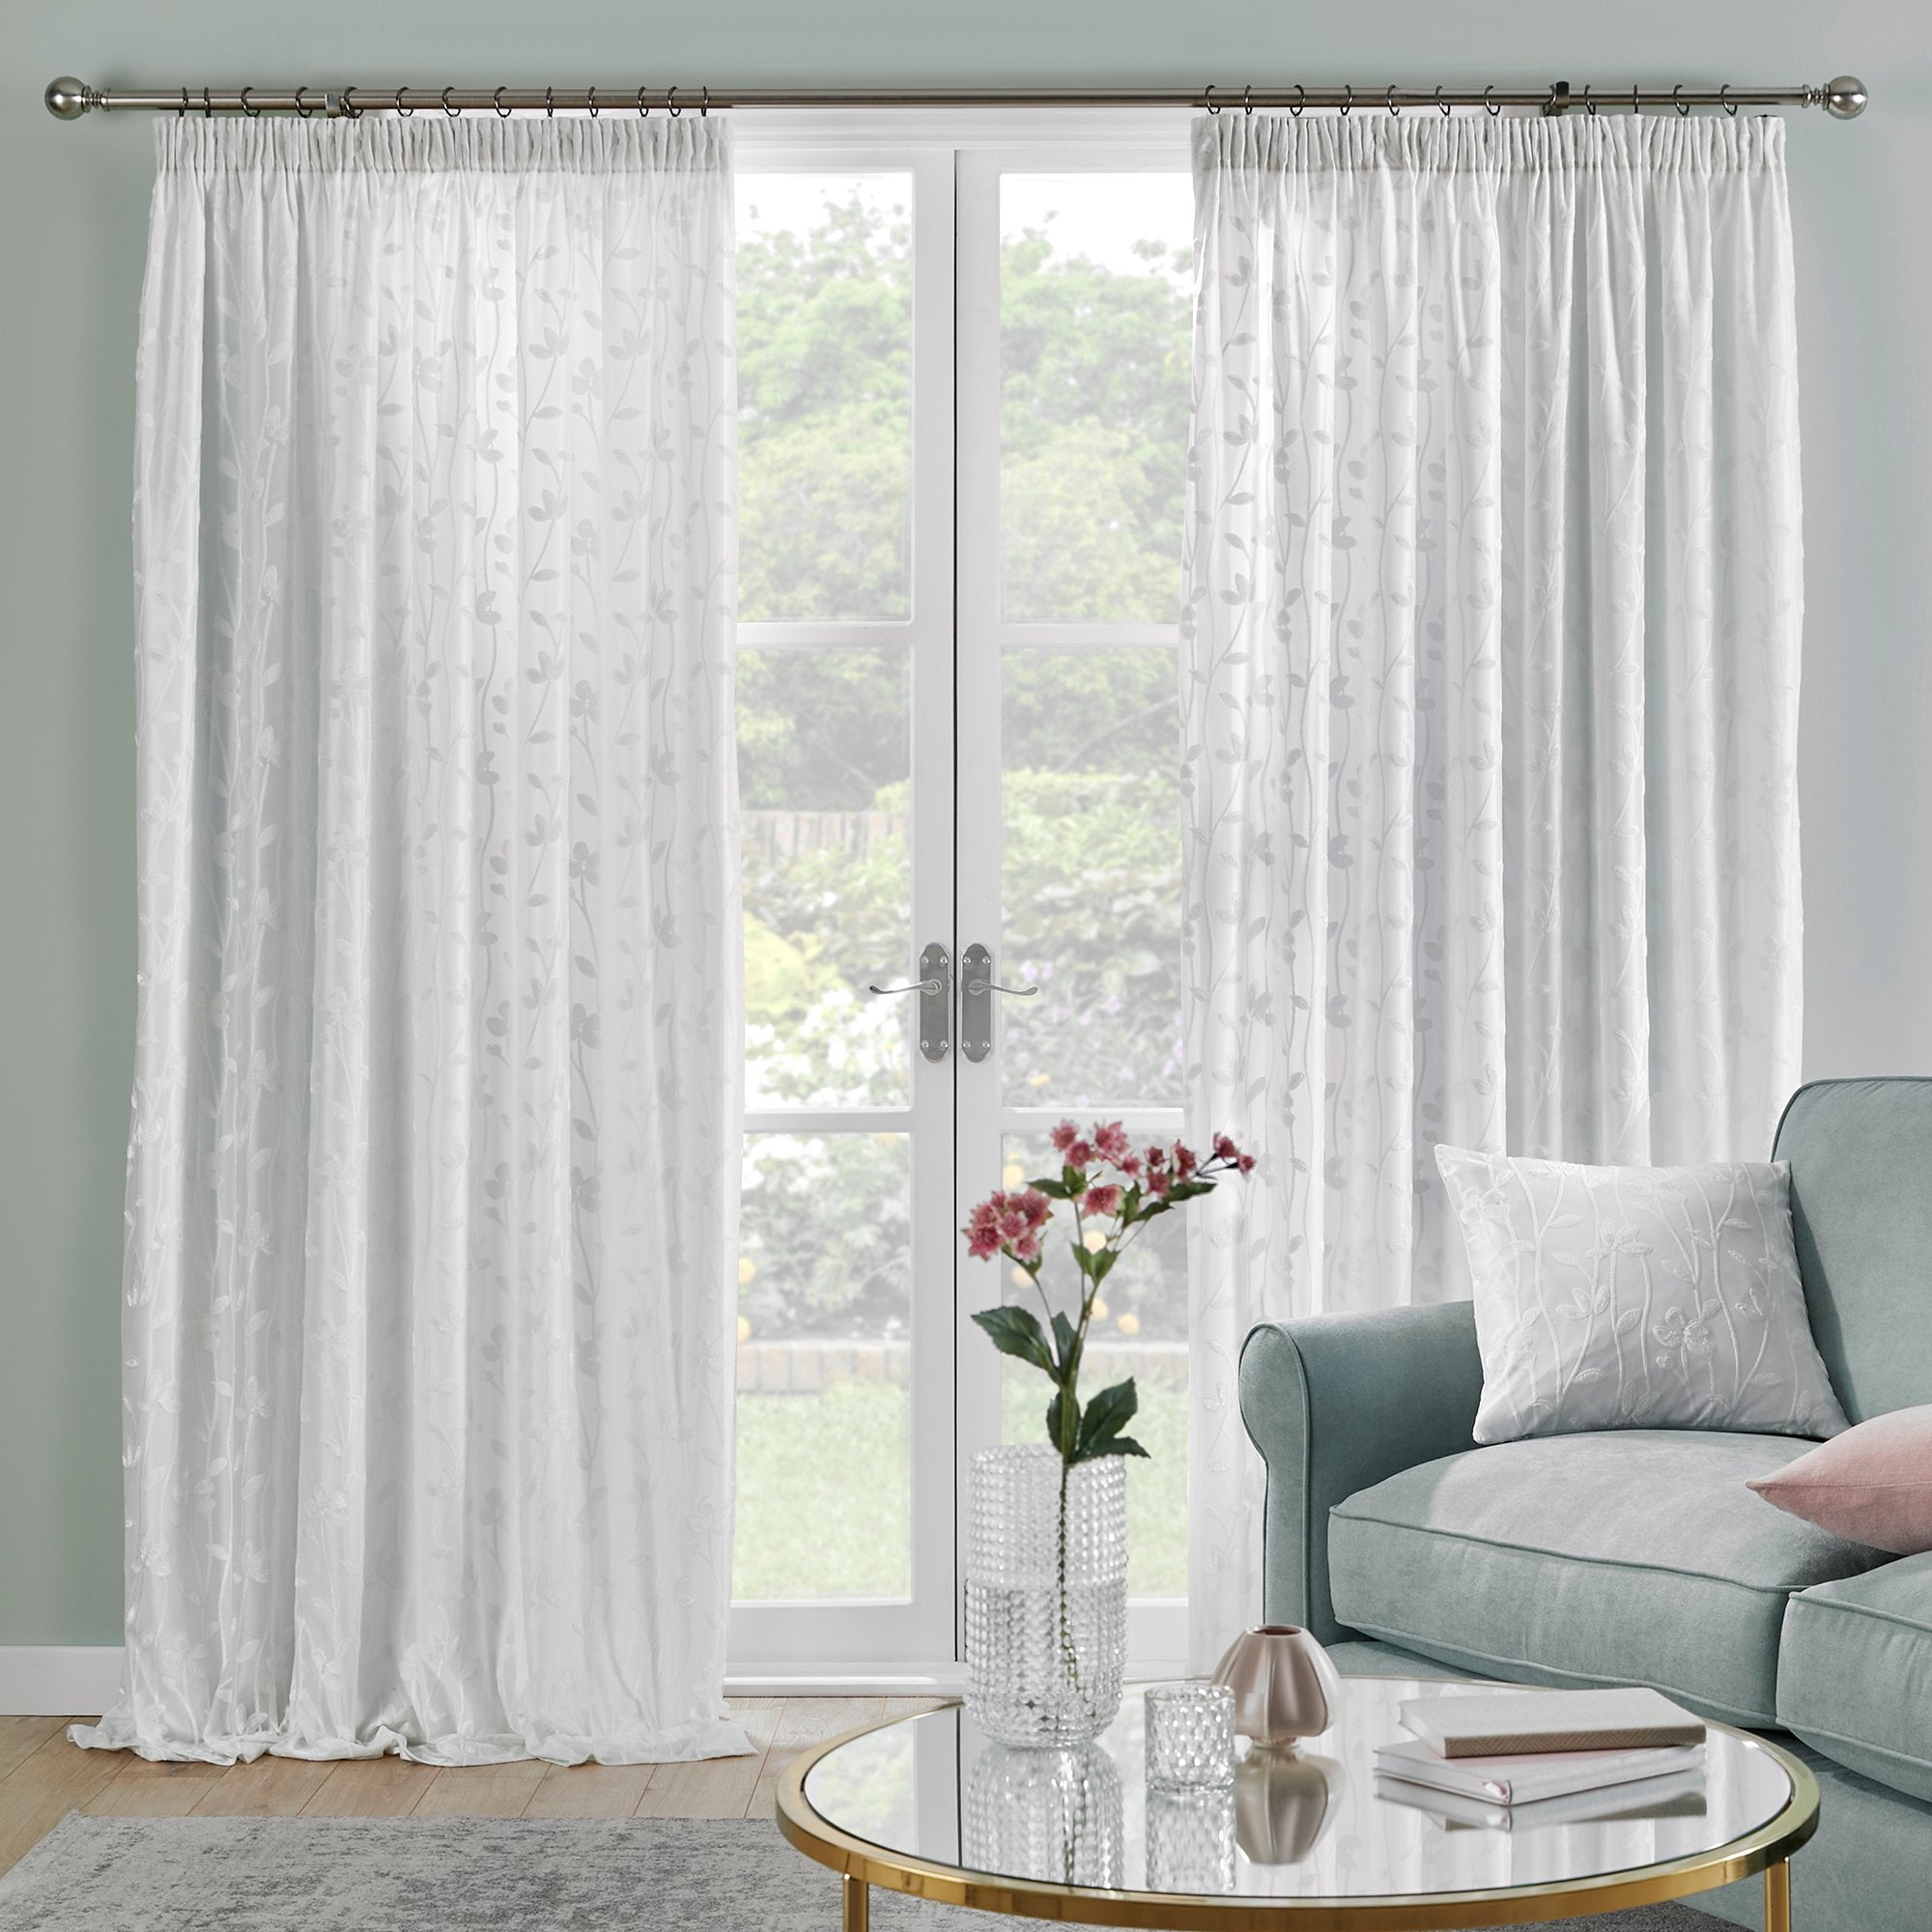 Pair of Pencil Pleat Curtains Sophia by Dreams & Drapes Curtains in Ivory